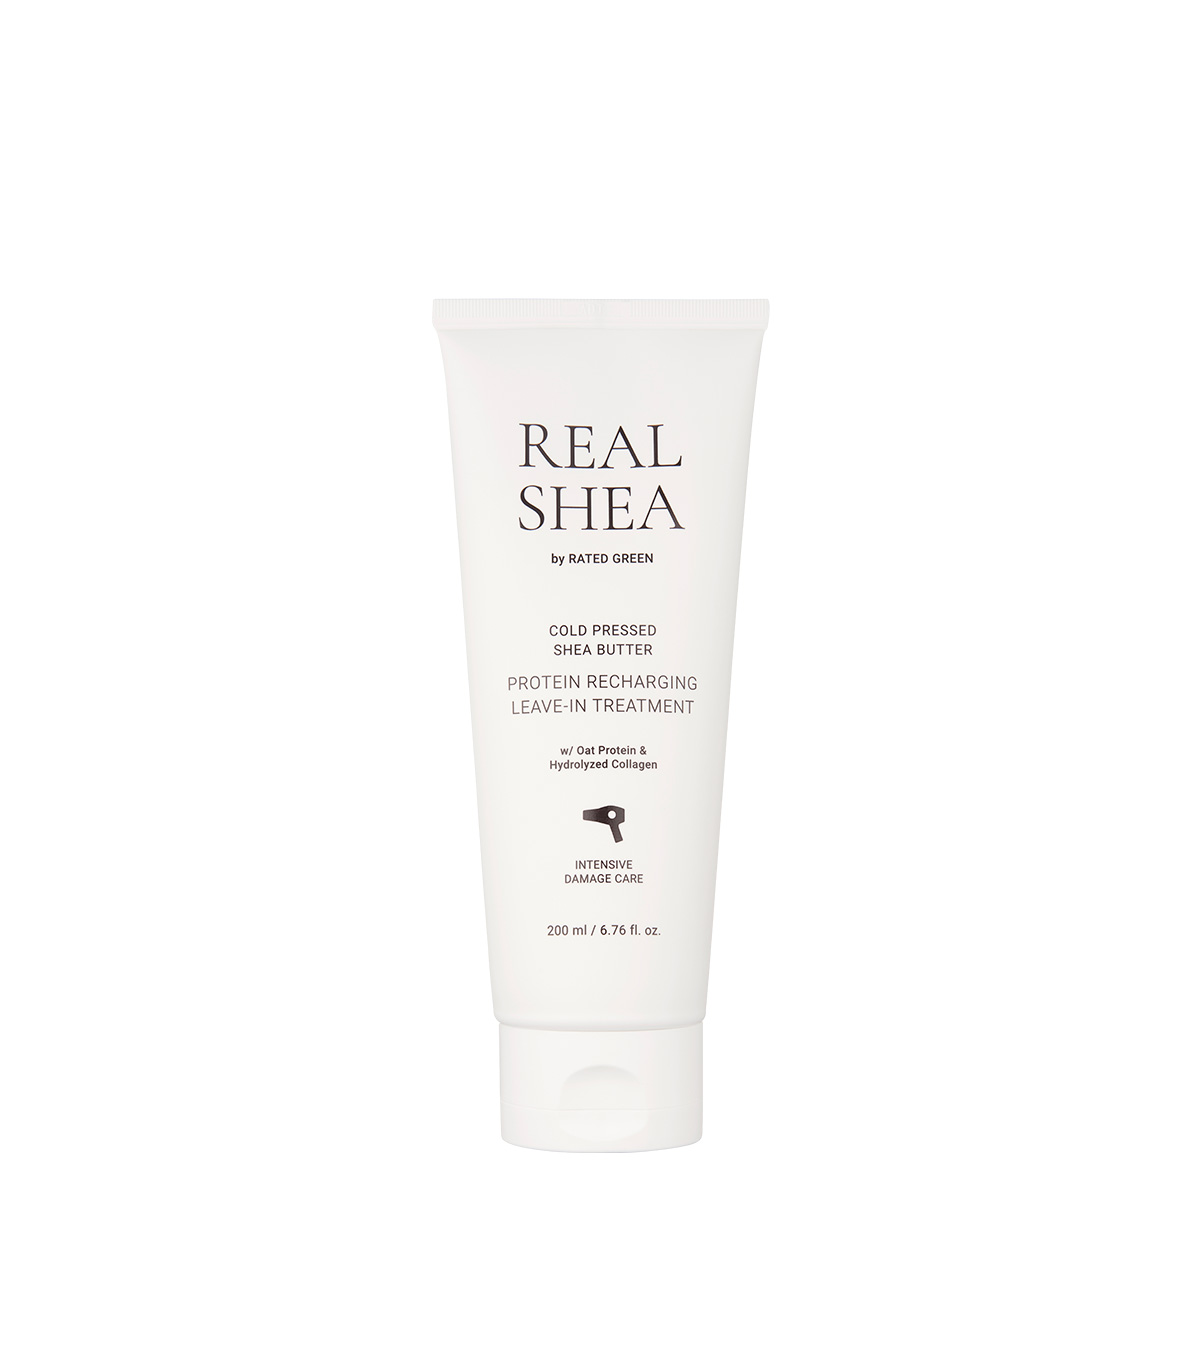 REAL SHEA PROTEIN RECHARGING LEAVE IN TREATMENT, RATED GREEN | Meka.sk